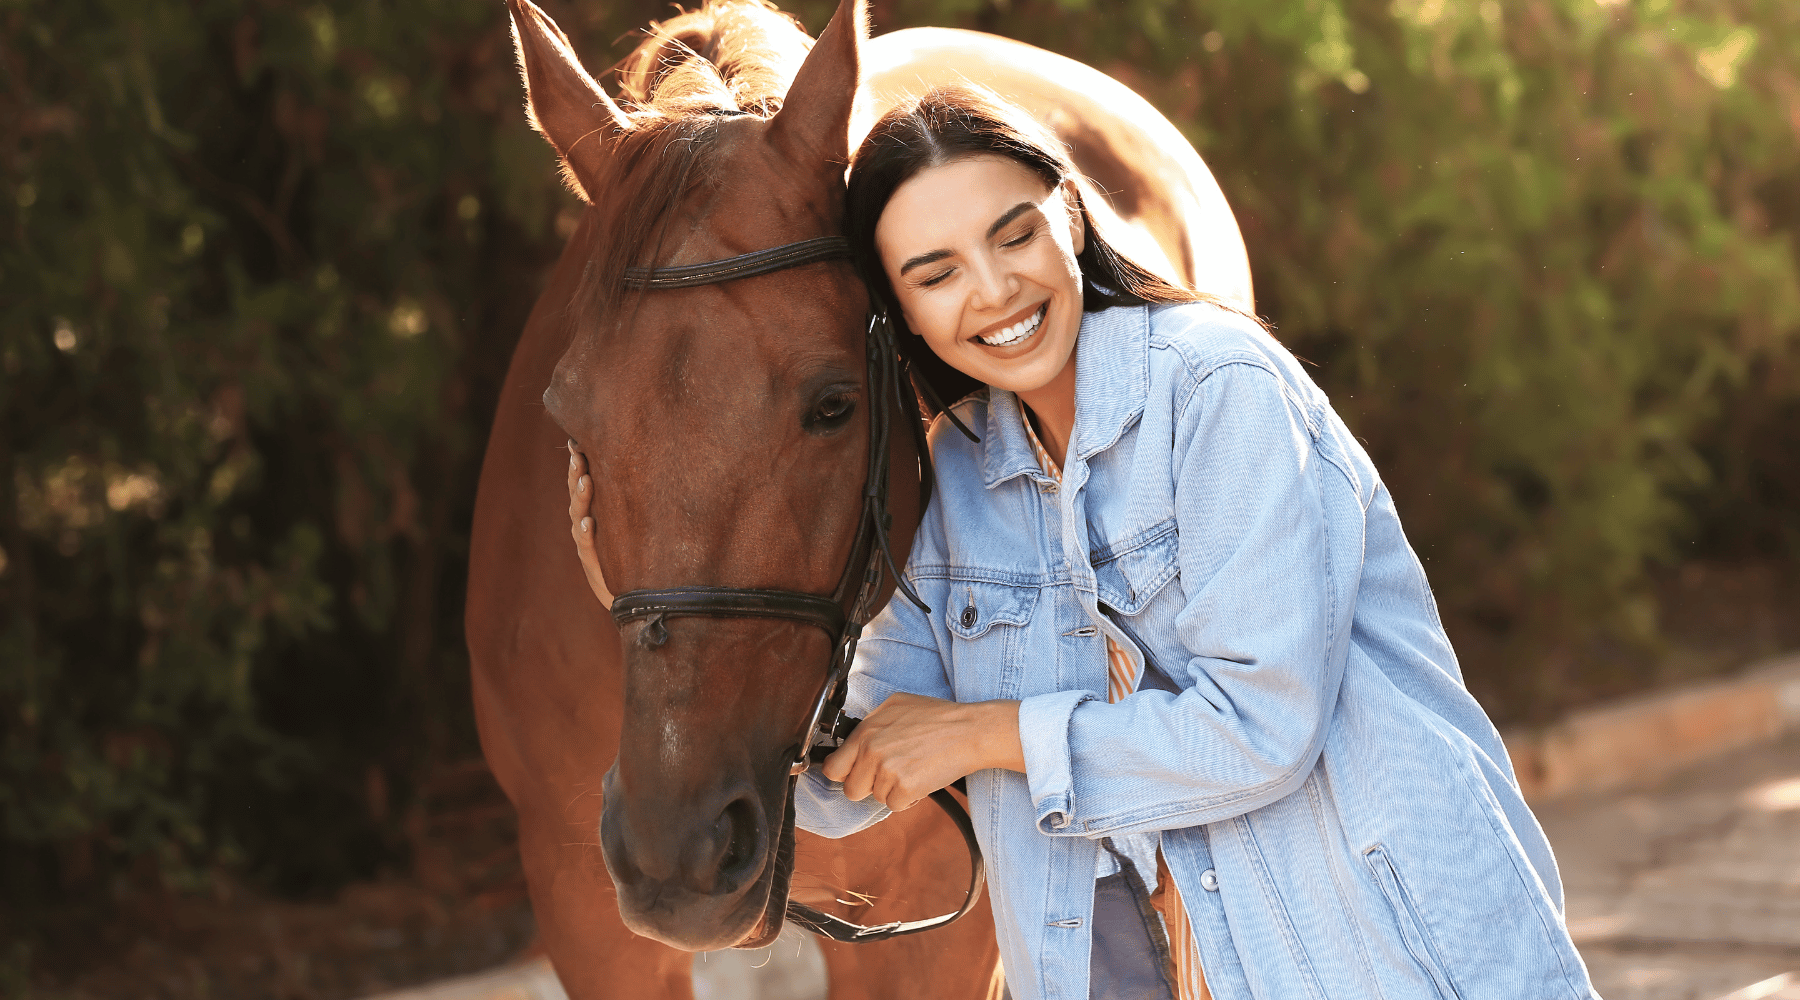 Close-up image of a woman hugging her horse